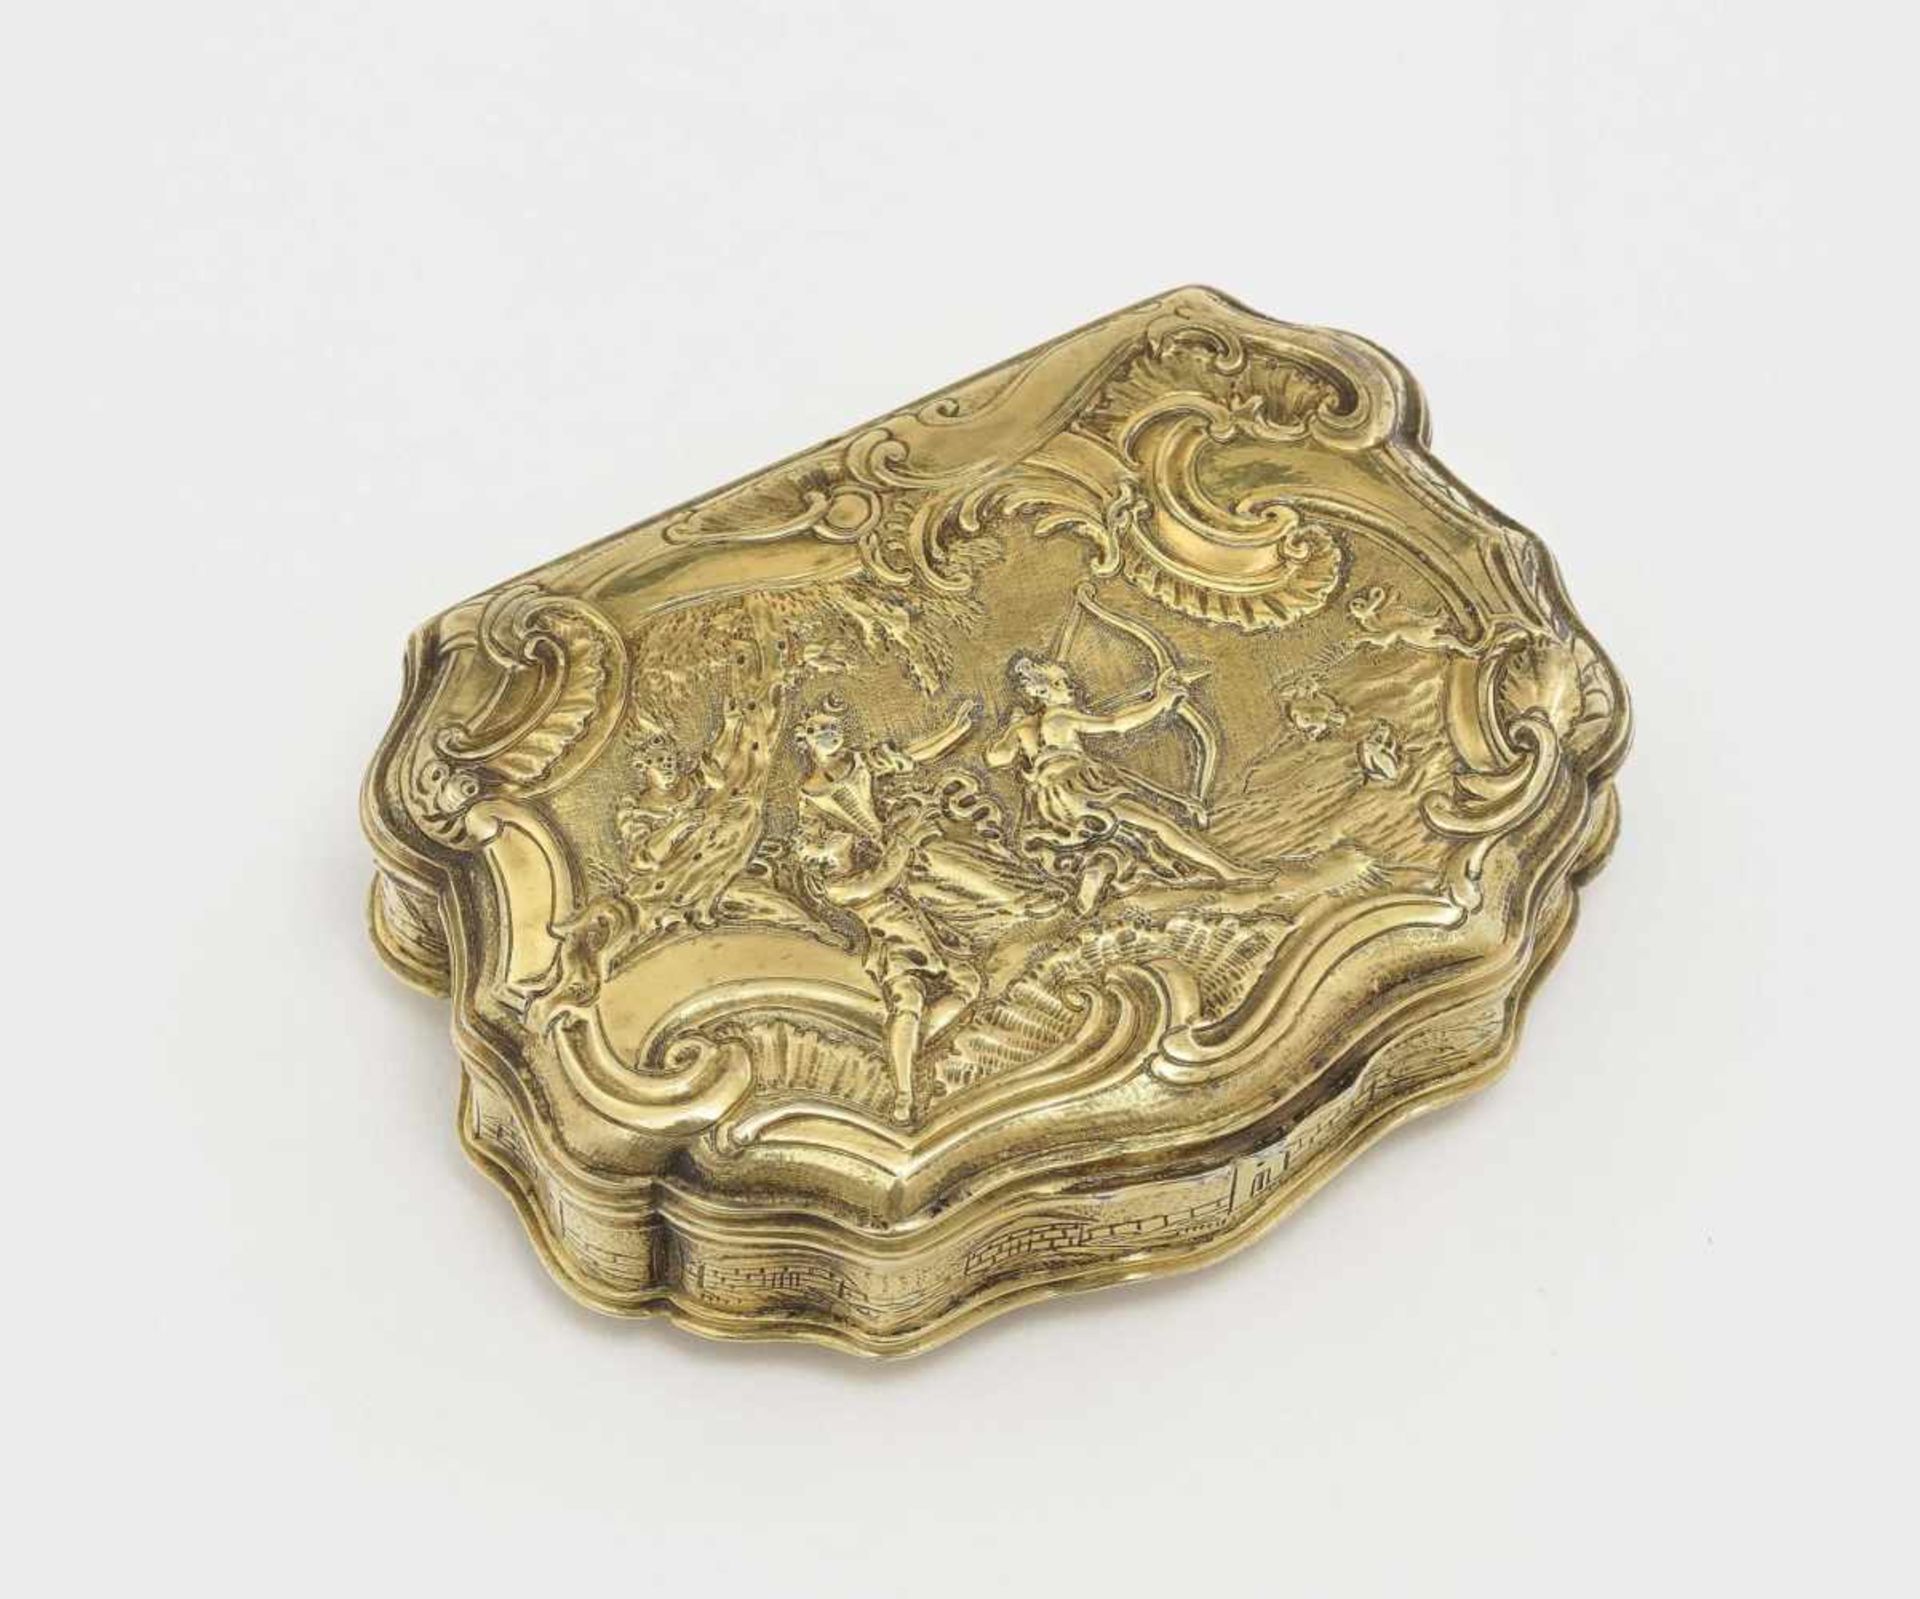 A Snuff BoxFrance (Ste. Menehould?), circa 1760 Silver, gold-plated. Hammered, chased and embossed